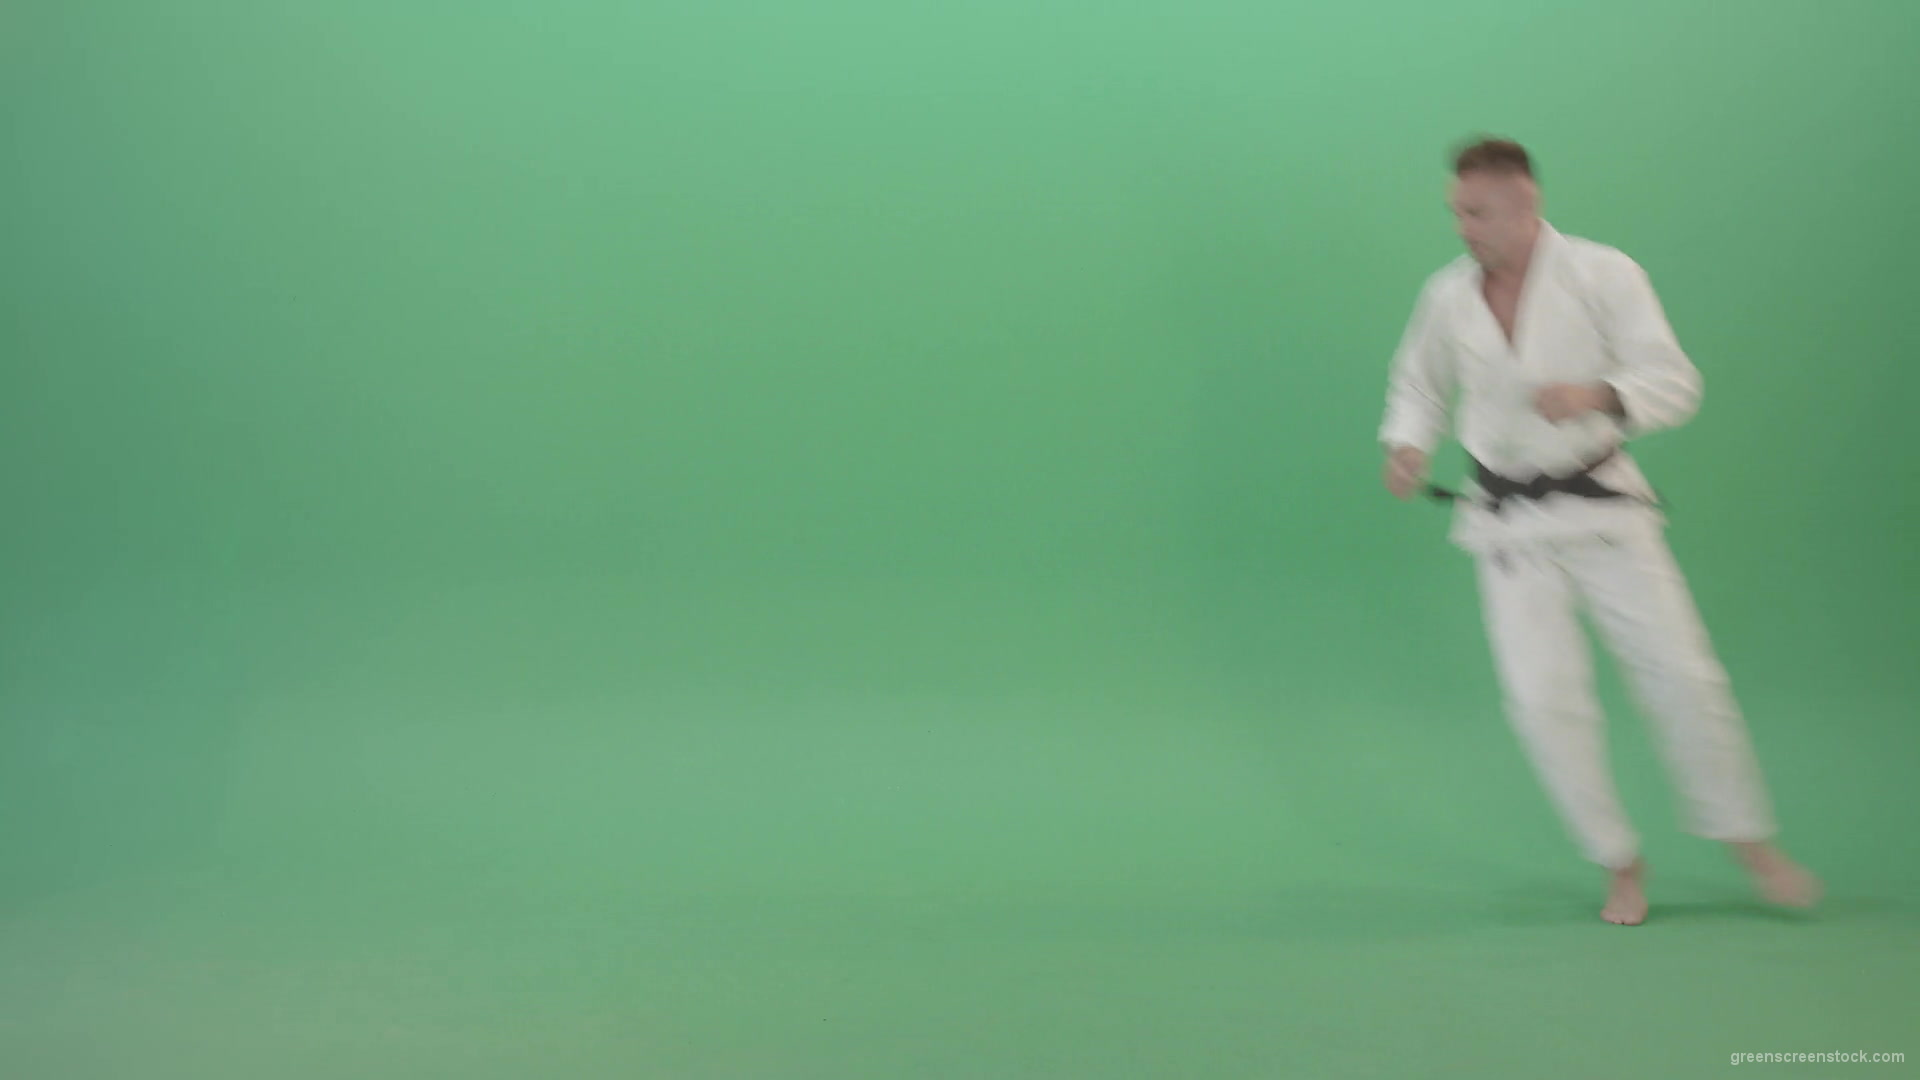 Super-Fighting-Combo-by-Jujutsu-man-in-side-view-isolated-on-green-screen-4K-Video-Footage-1920_008 Green Screen Stock